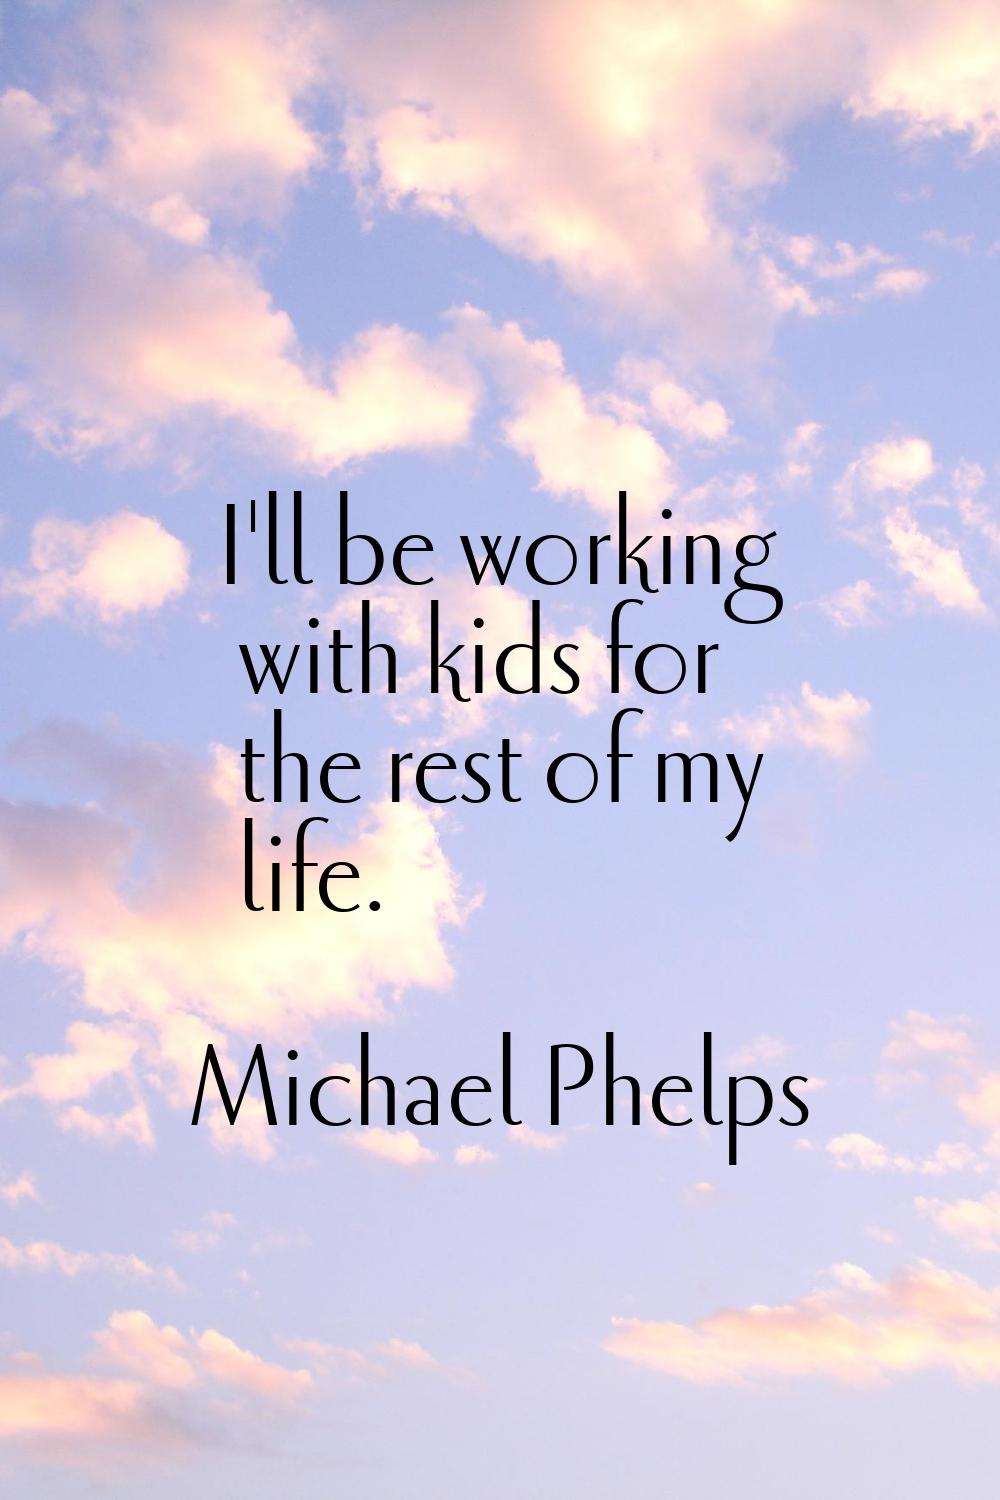 I'll be working with kids for the rest of my life.